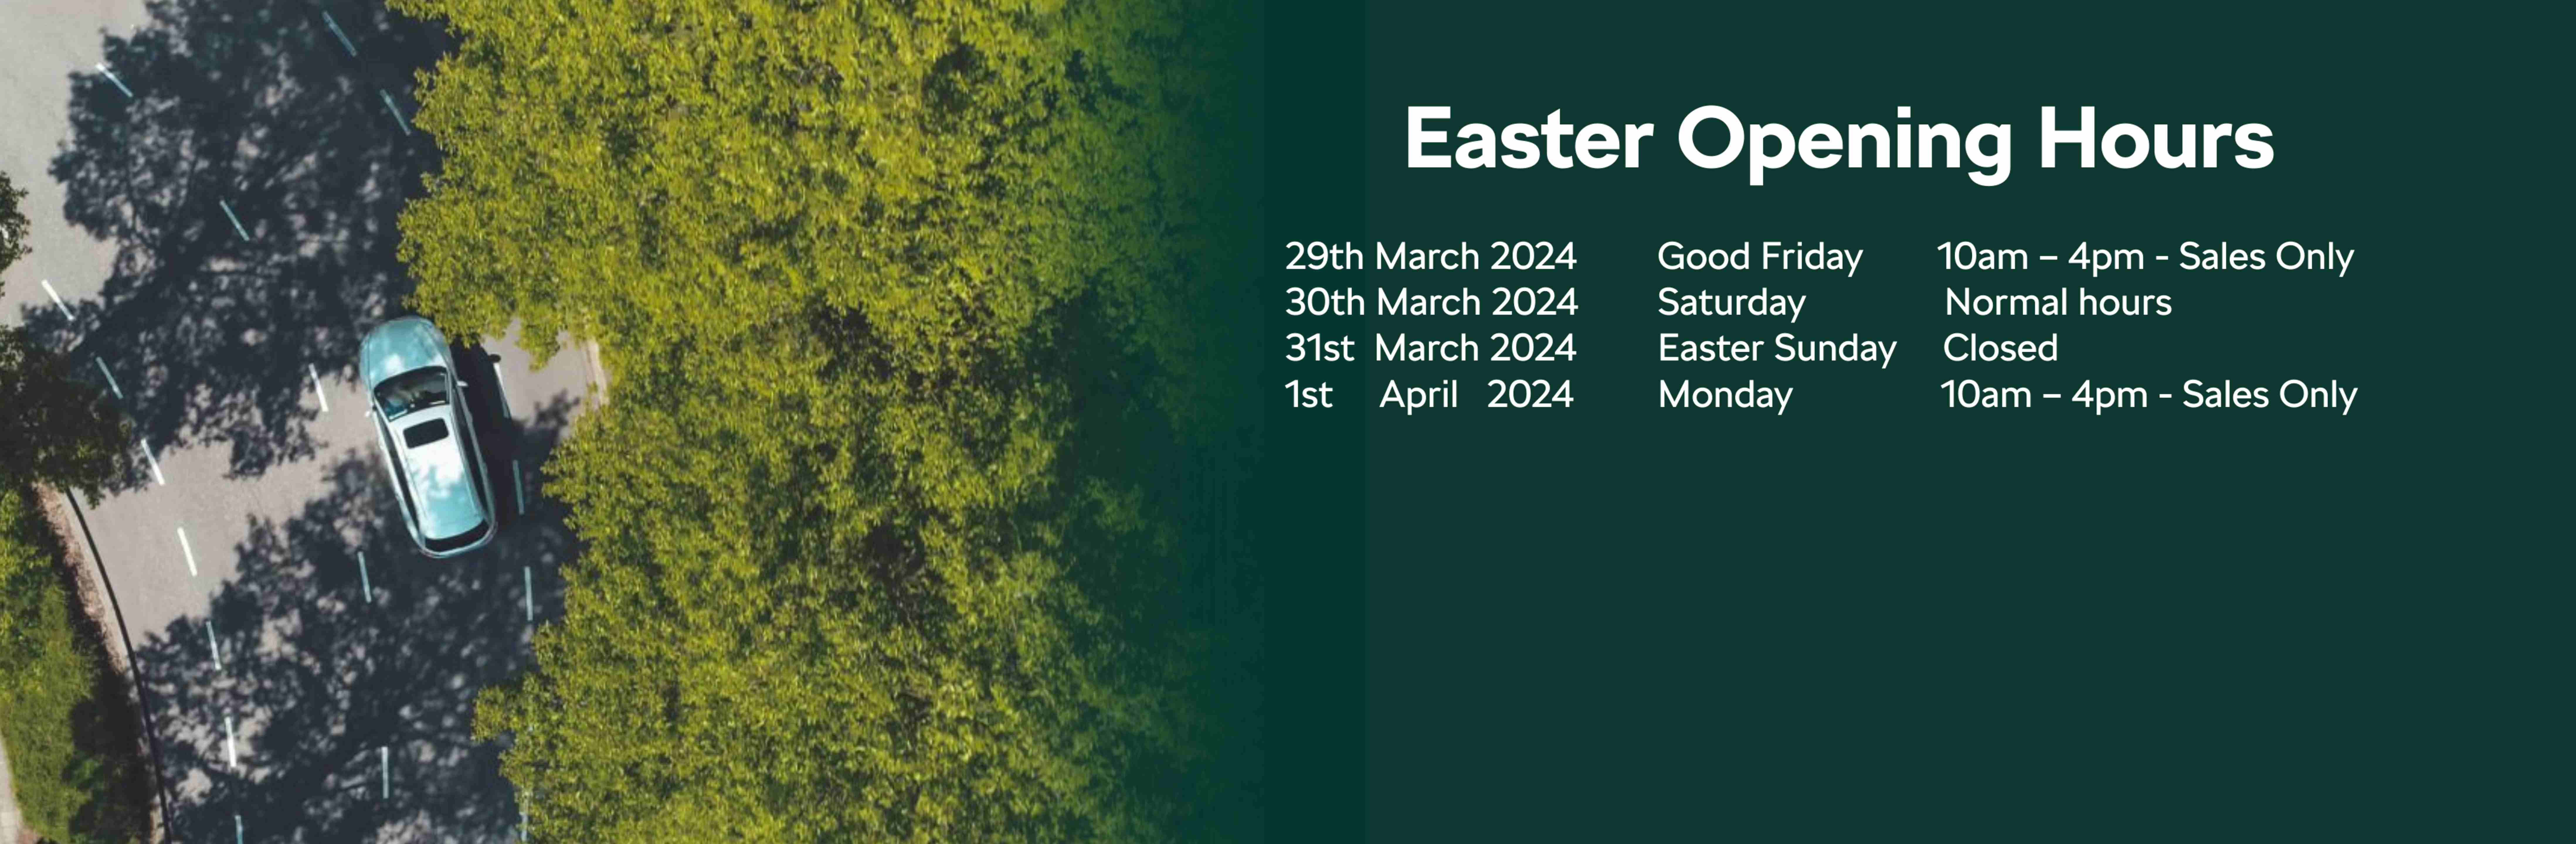 Easter Opening Hours 2024